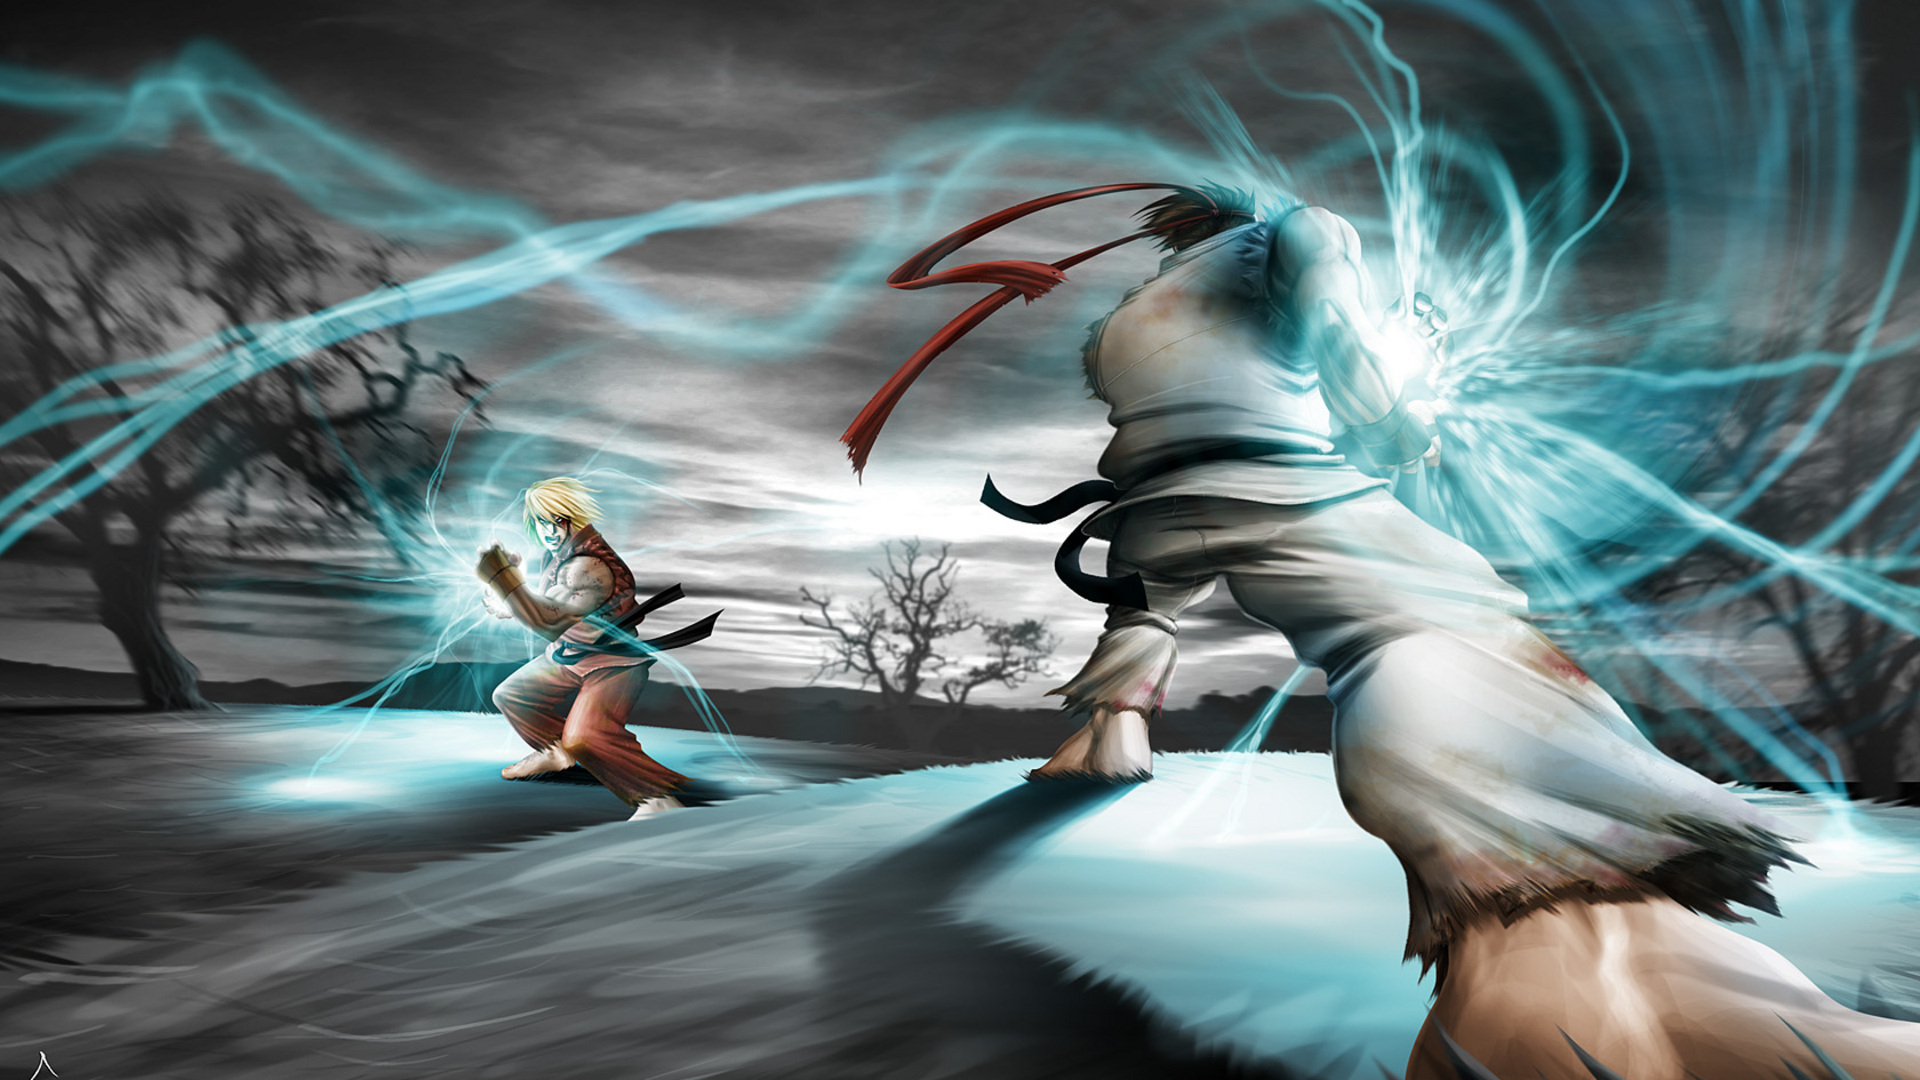 Street Fighter characters Ryu and Ken engaged in a battle on a vibrant city street.